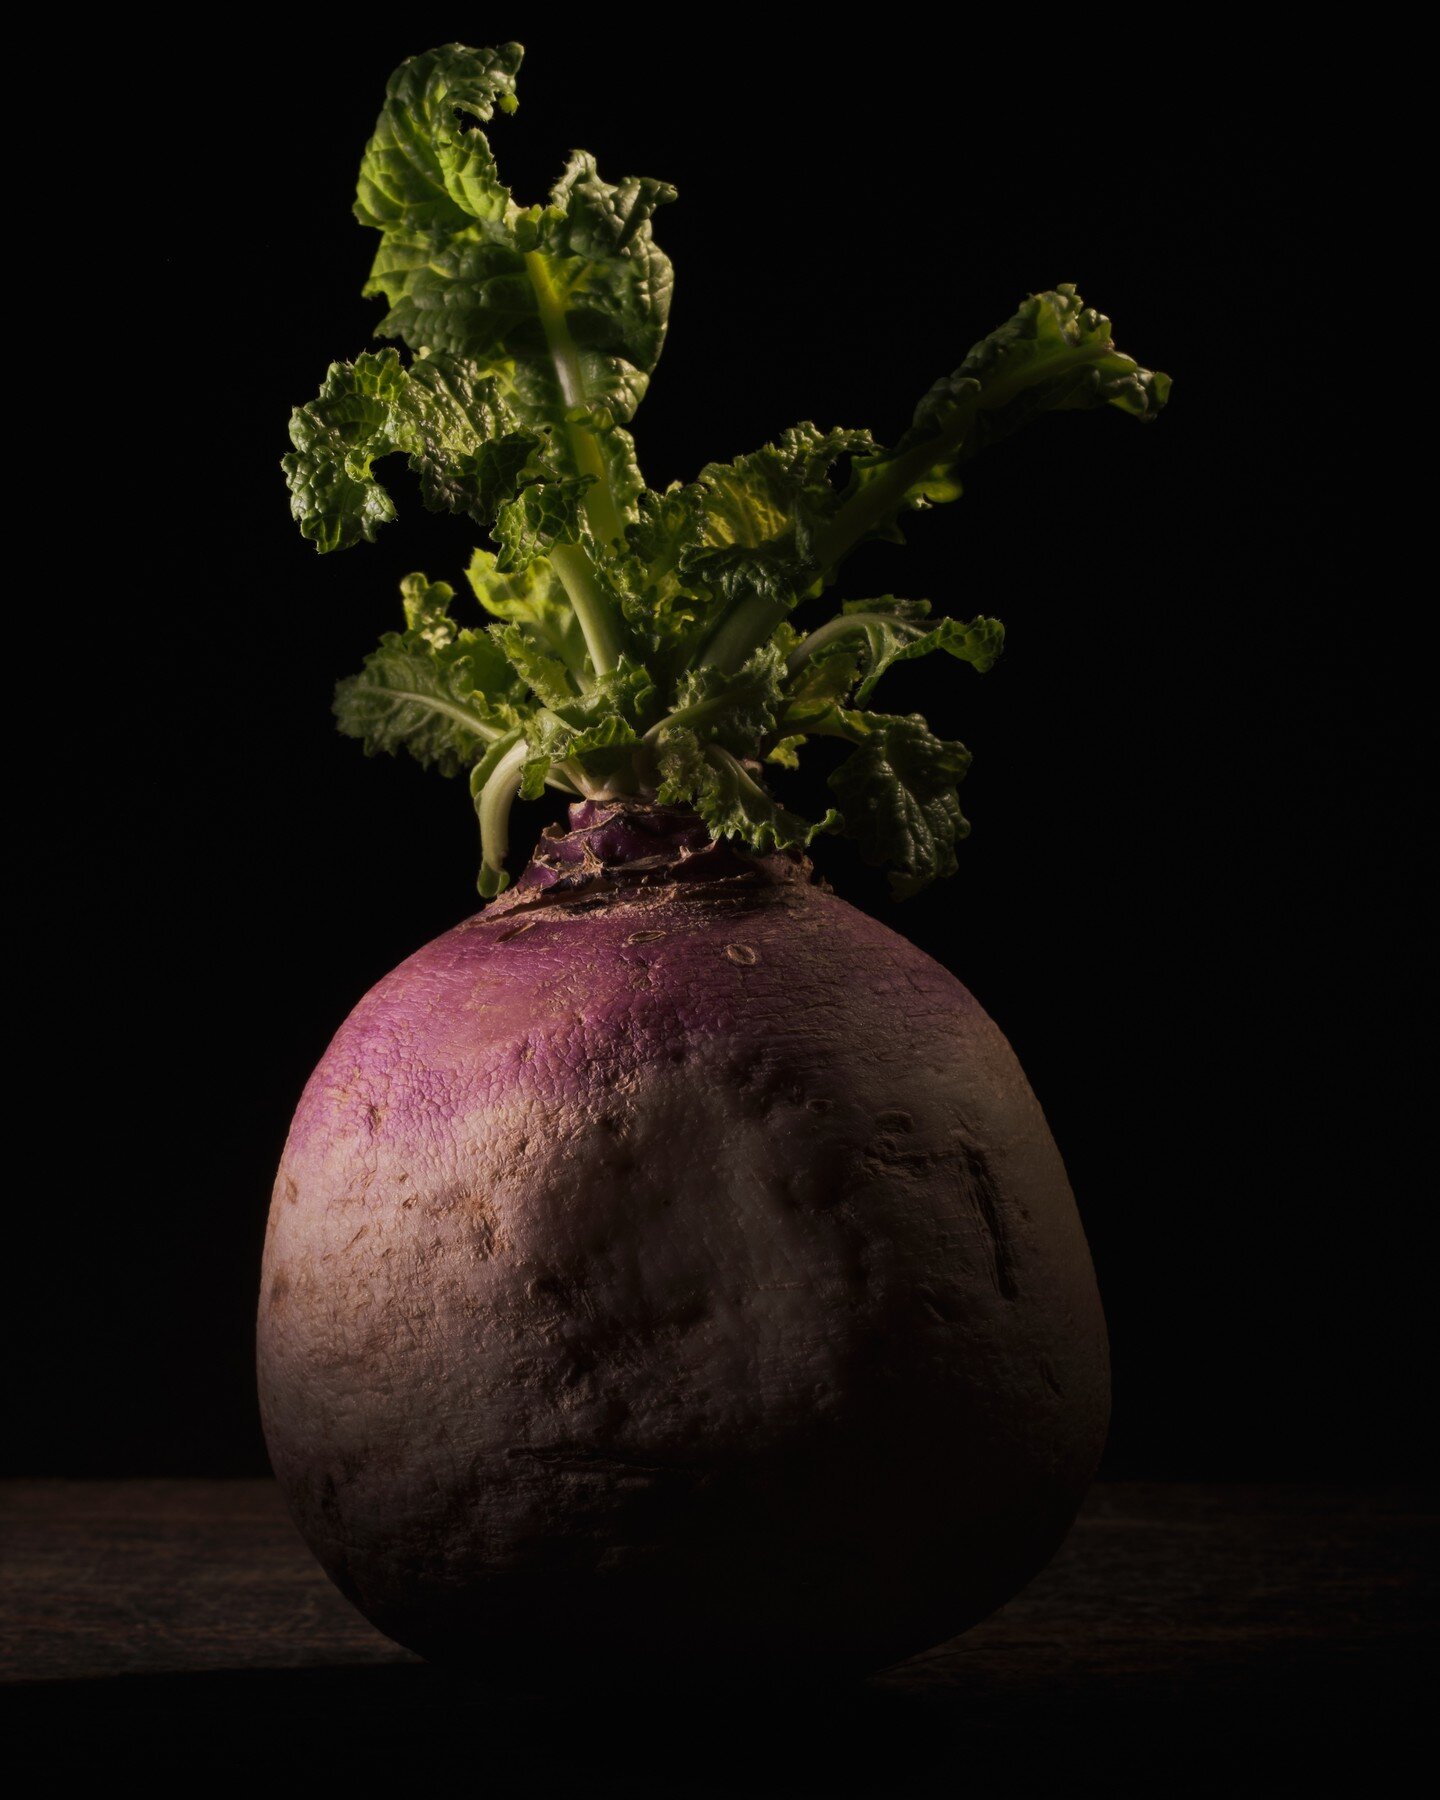 Turnip Portrait

This post is a little different from the norm but fits into the premise that &quot;Practice makes Better&quot;. I love working out lighting scenarios and the Wescott FJ80 Speedlights with the Creative Pack turns my ideas into reality